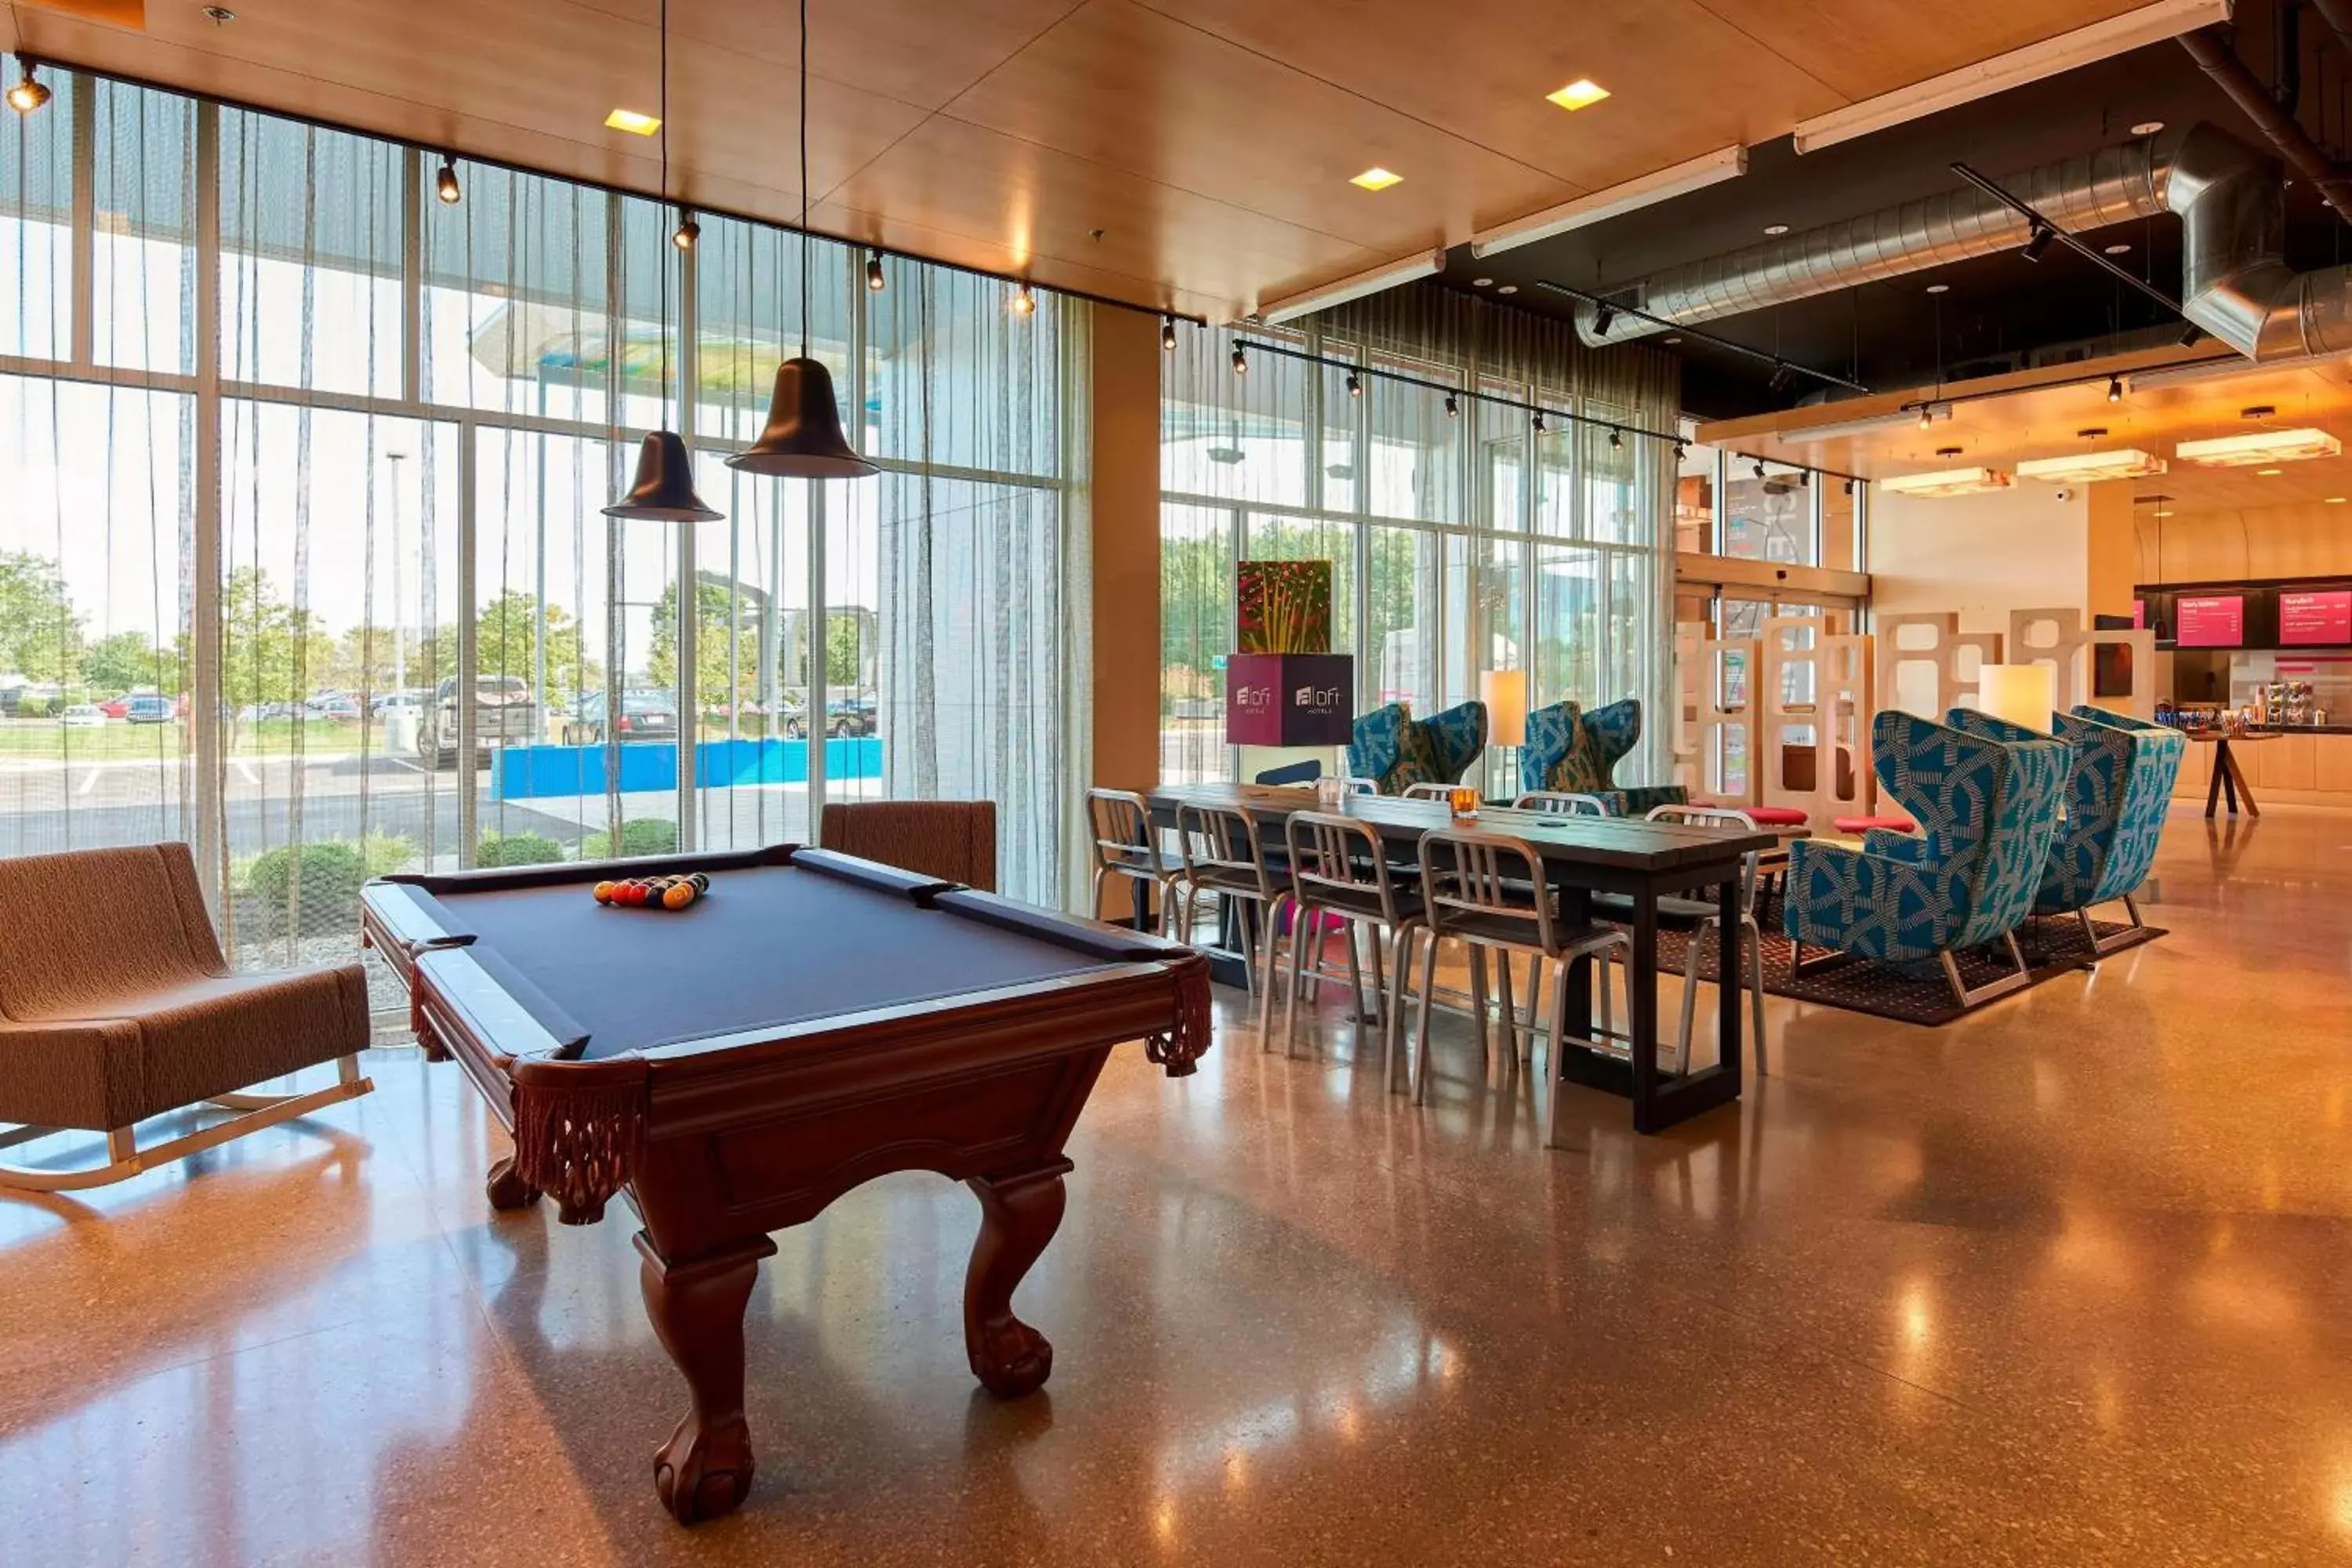 Swimming pool, Billiards in Aloft Cleveland Airport